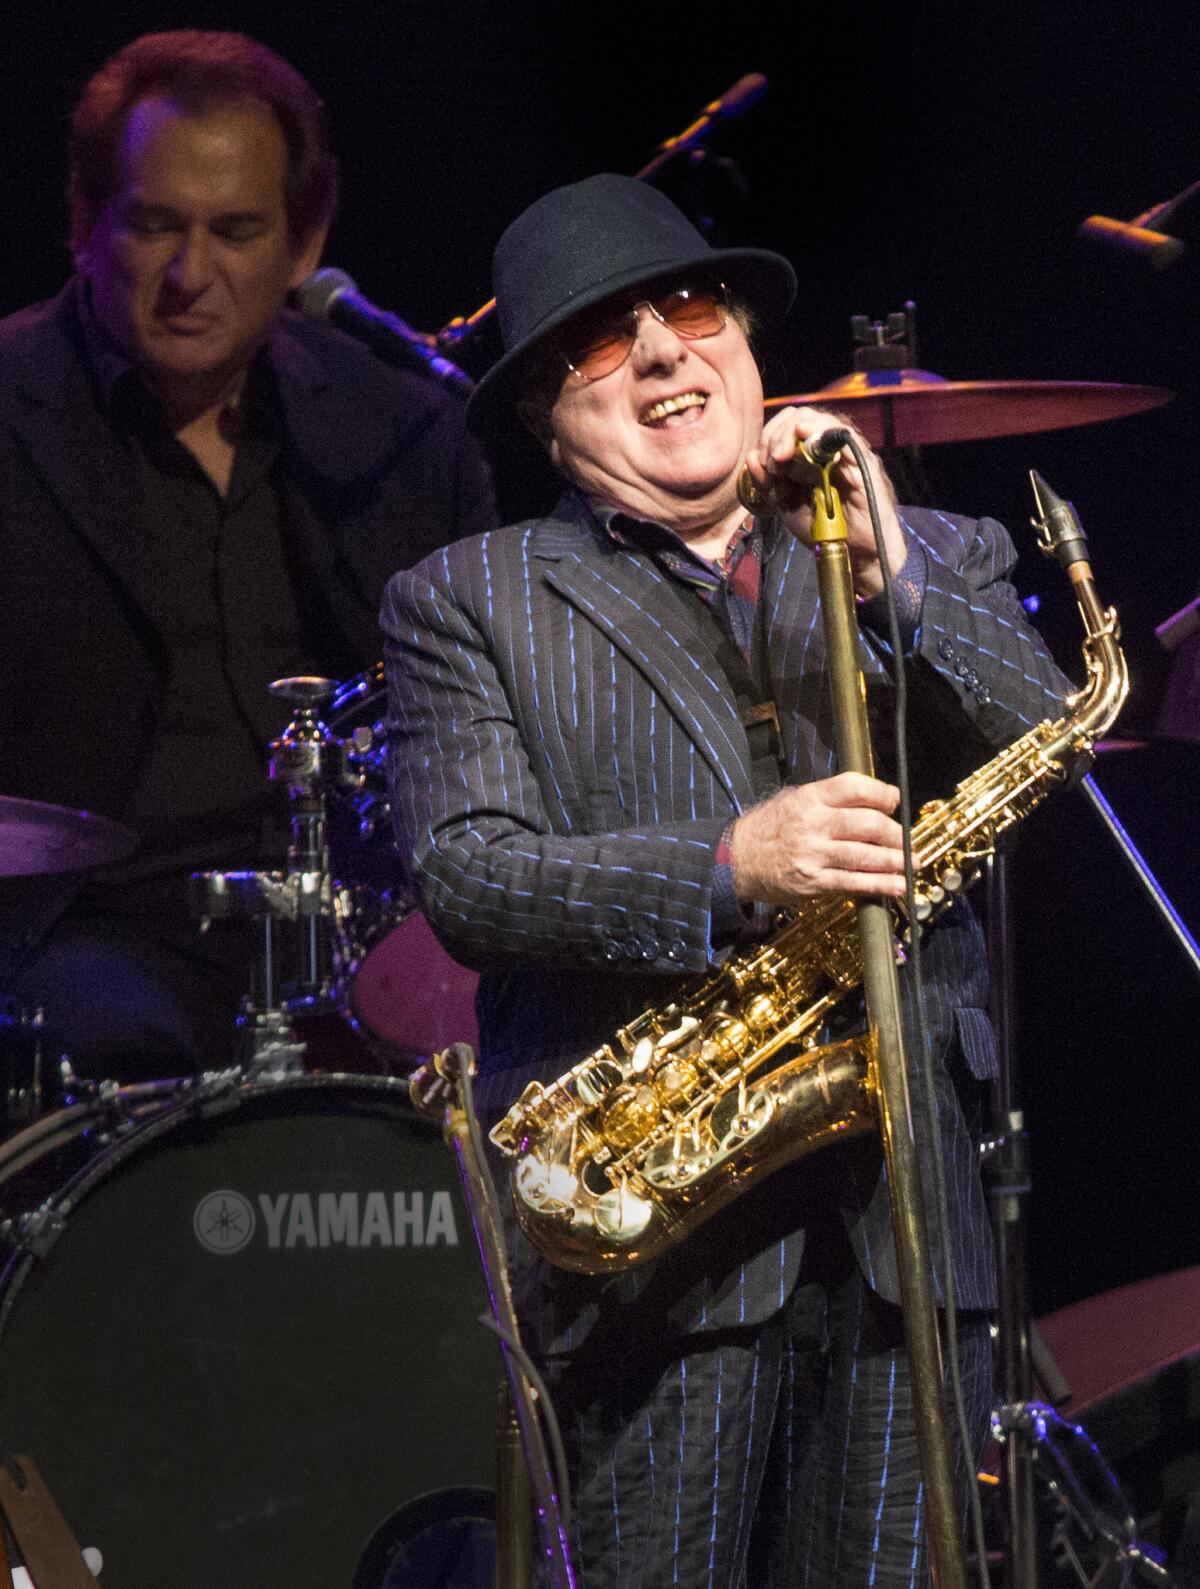 Van Morrison in concert in January at the Shrine Auditorium in Los Angeles